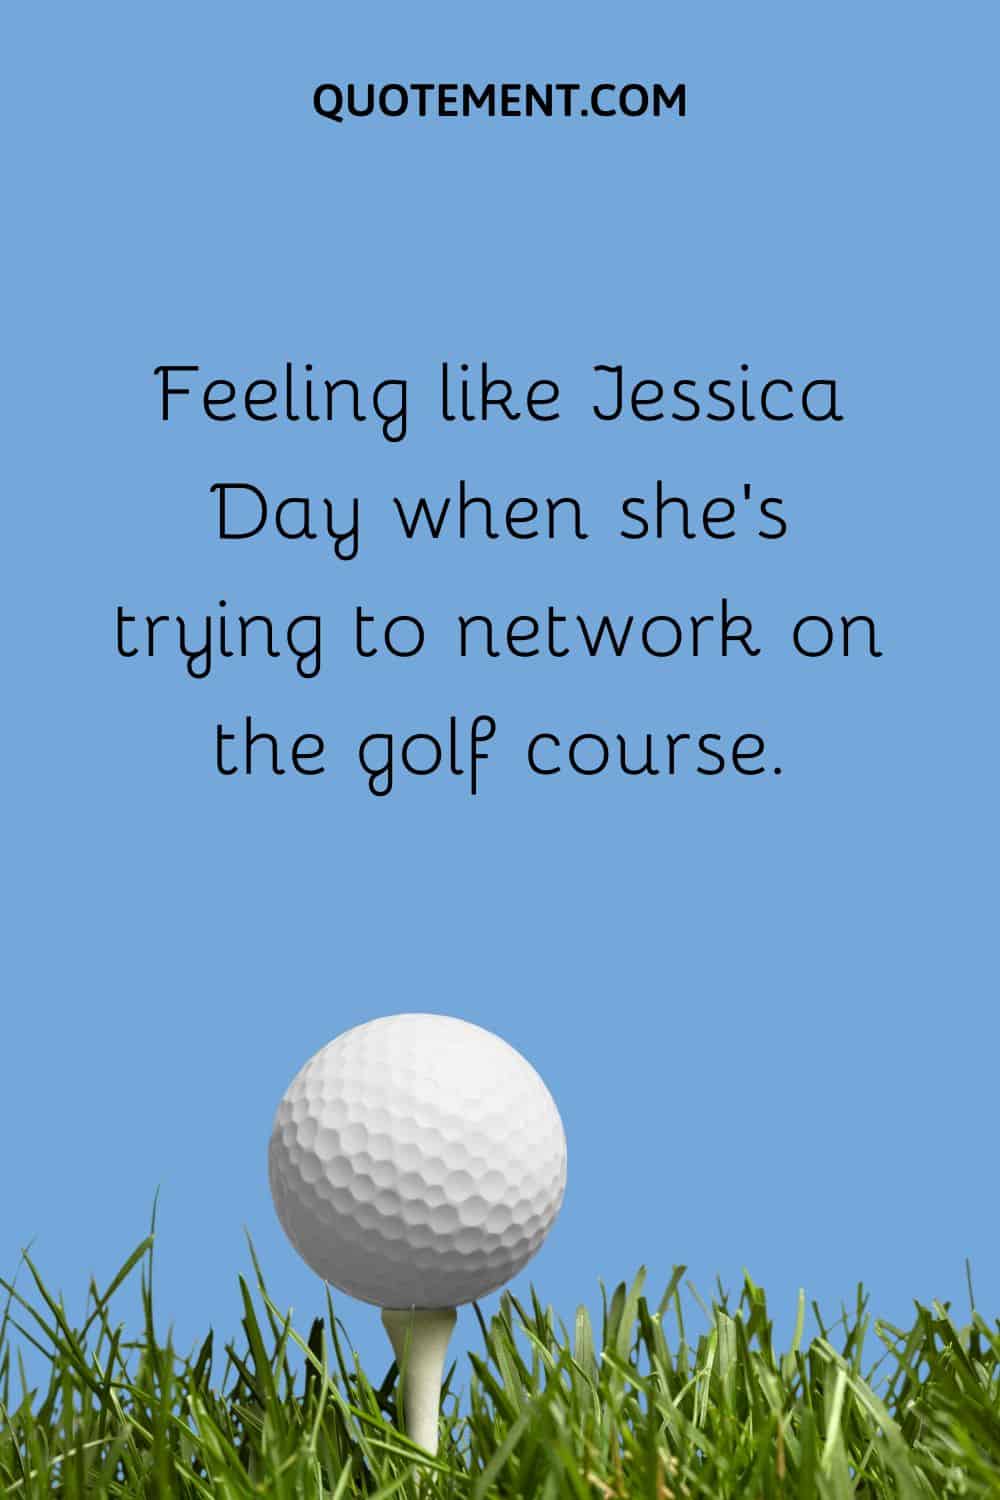 Feeling like Jessica Day when she’s trying to network on the golf course.